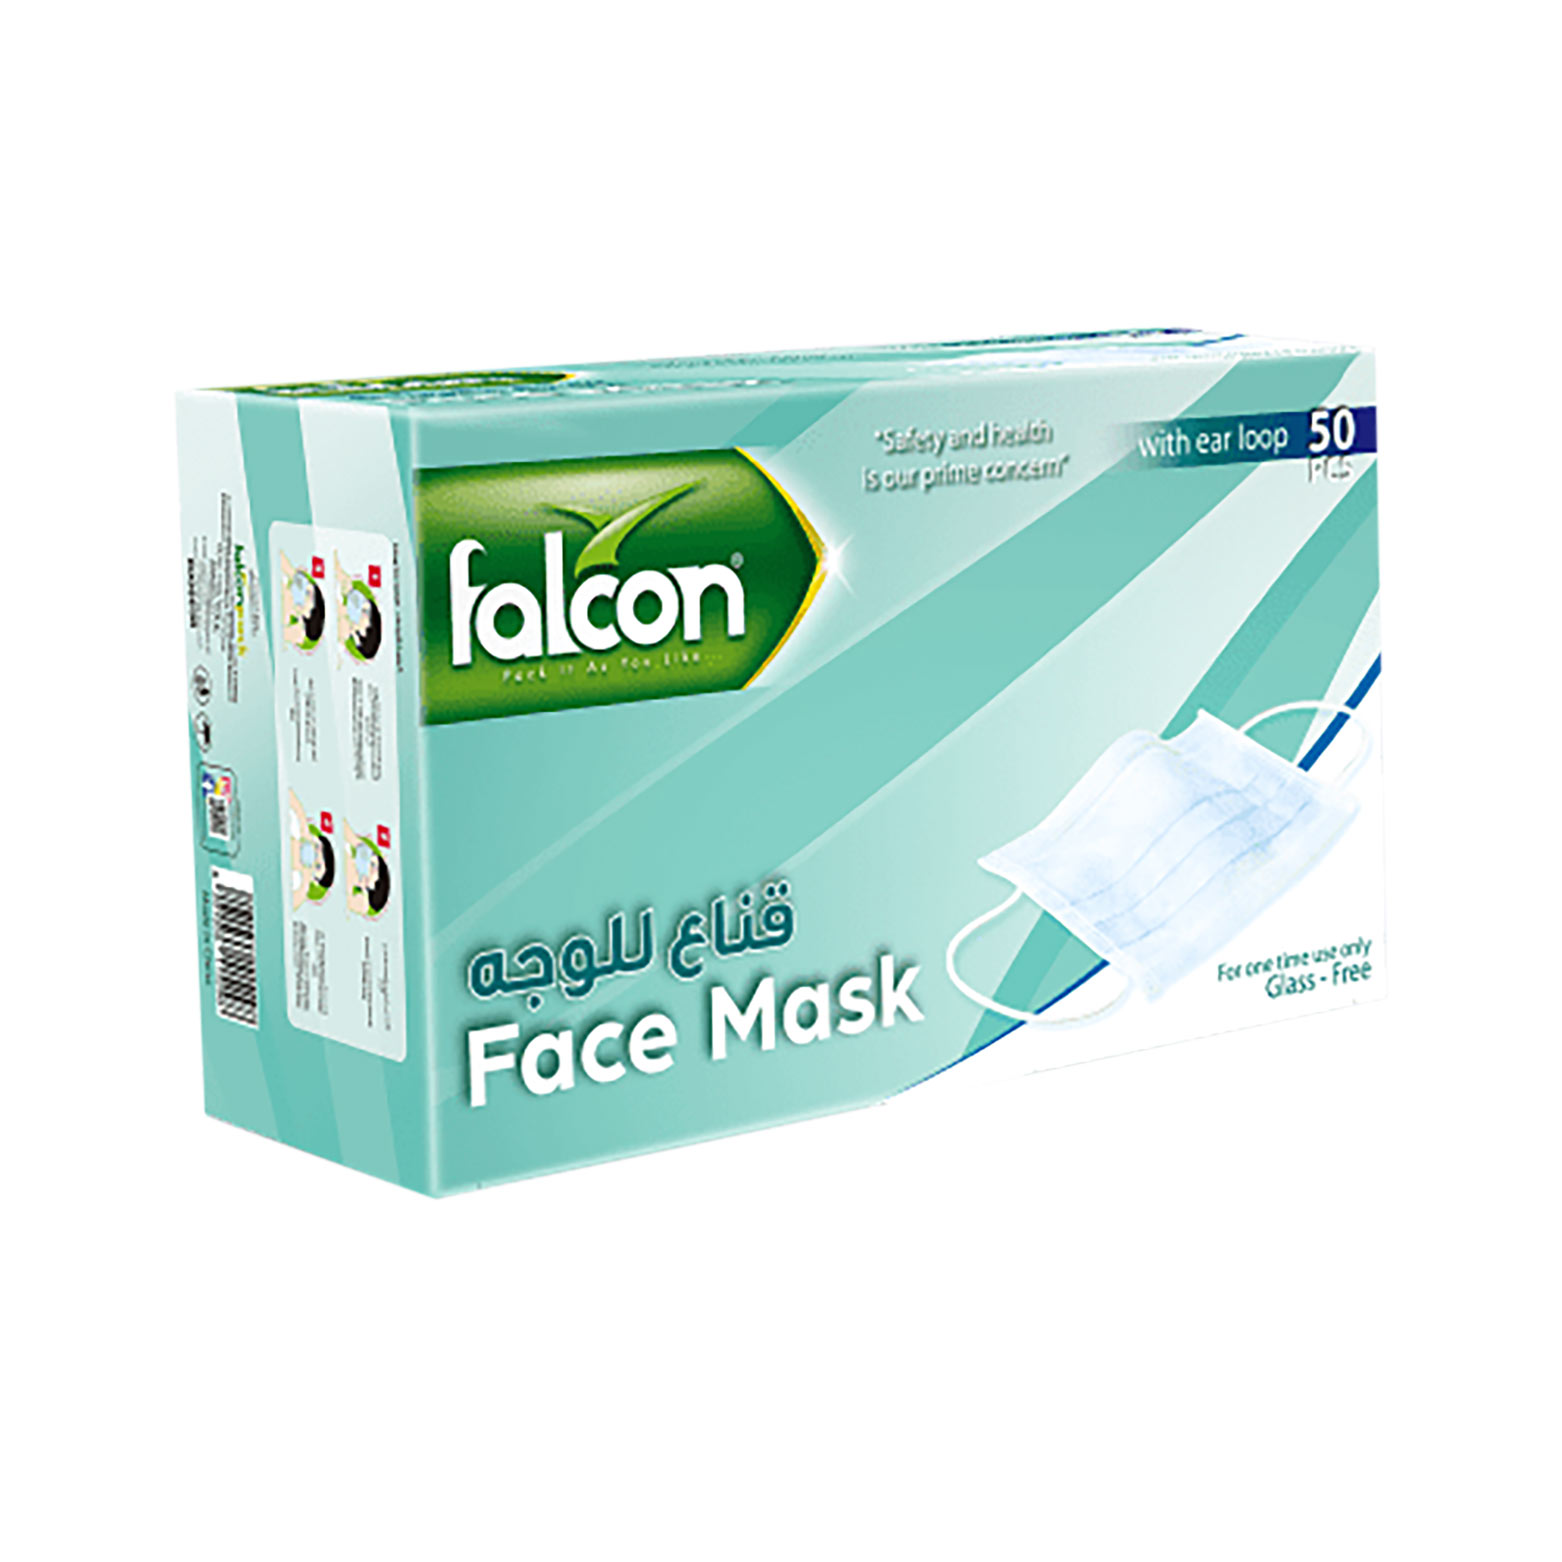 Disposable Face Mask with Ear Loop